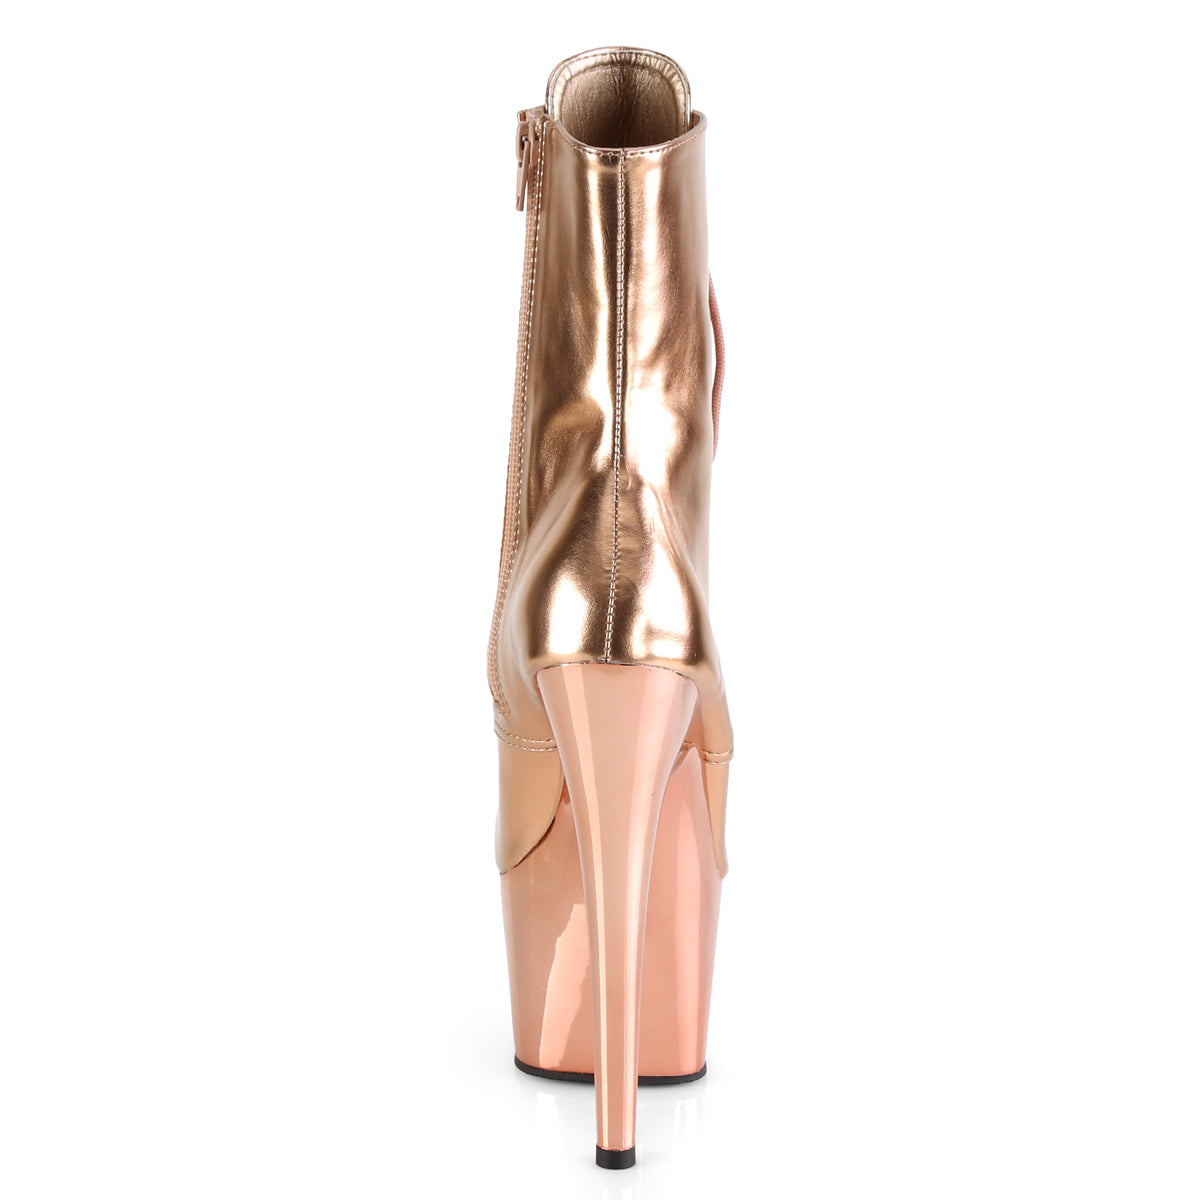 ADORE 1020 7" Rose Gold Metallic Exotic Dancer Ankle Boots Pleaser Sexy Shoes Fetish Footwear